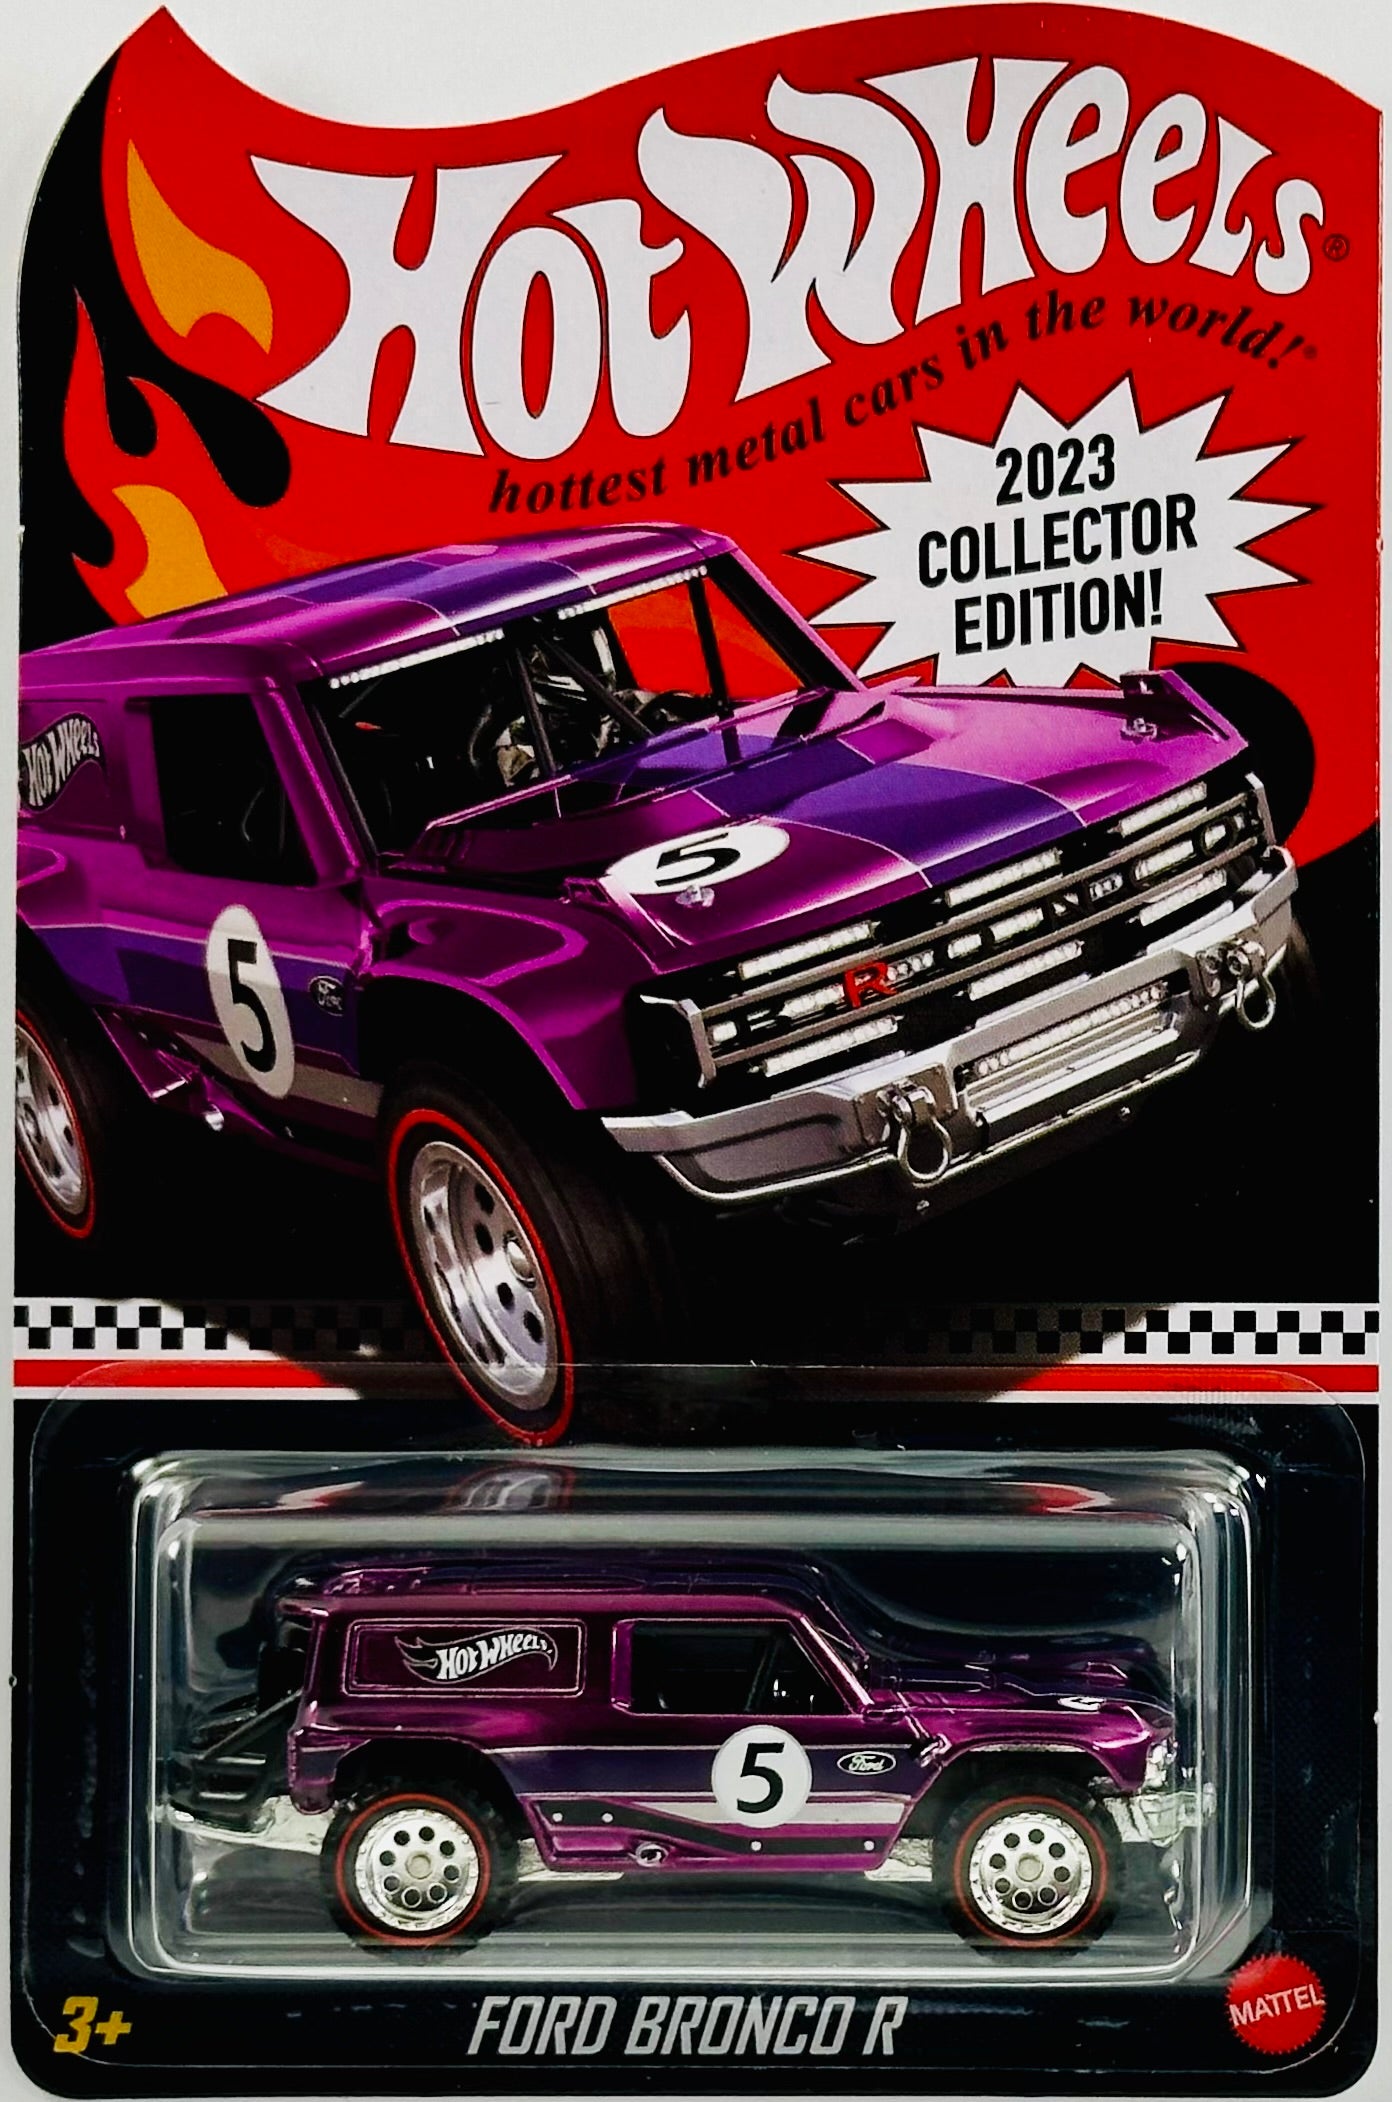 Hot Wheels 2023 - Collector Edition - Ford Bronco R - Spectraflame Purple - '5' / Highly Detailed - Metal/Metal & Real Riders - Kroger Mail-in